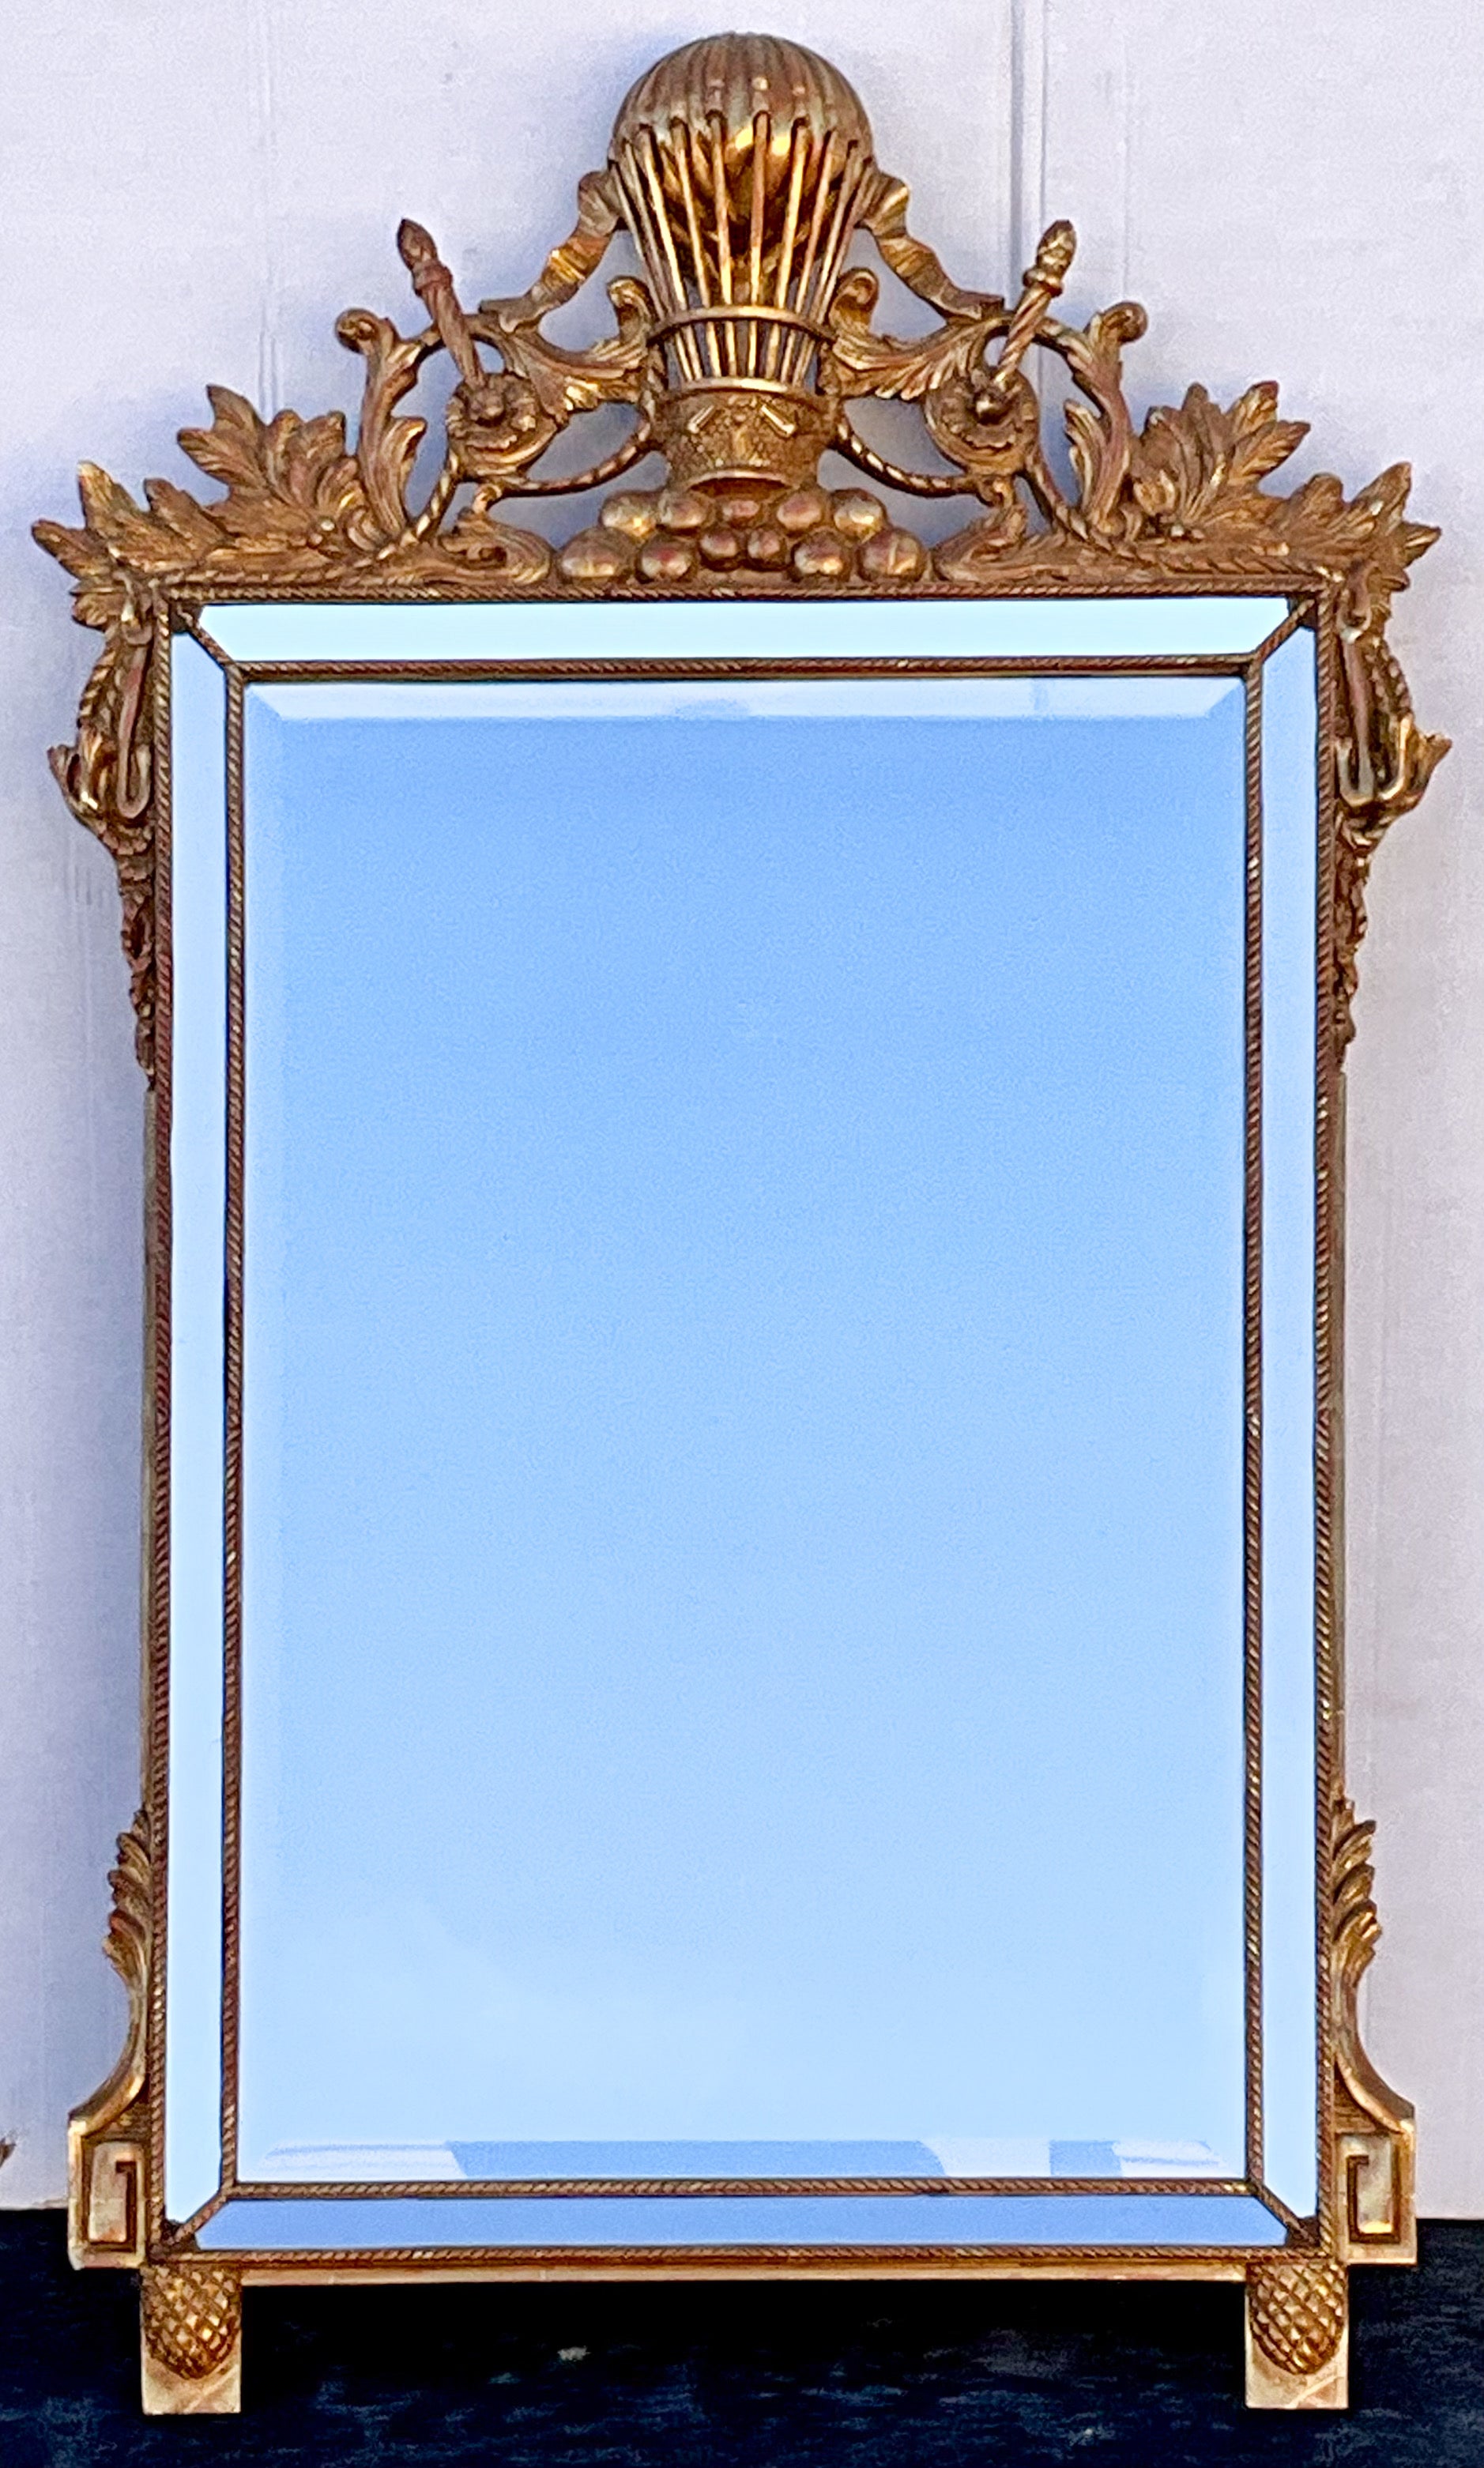 It is an Italian carved giltwood balloon form mirror with French Empire styling. It has mirrored frame and Greek key and tassel appointments. It is marked and in very good condition.








